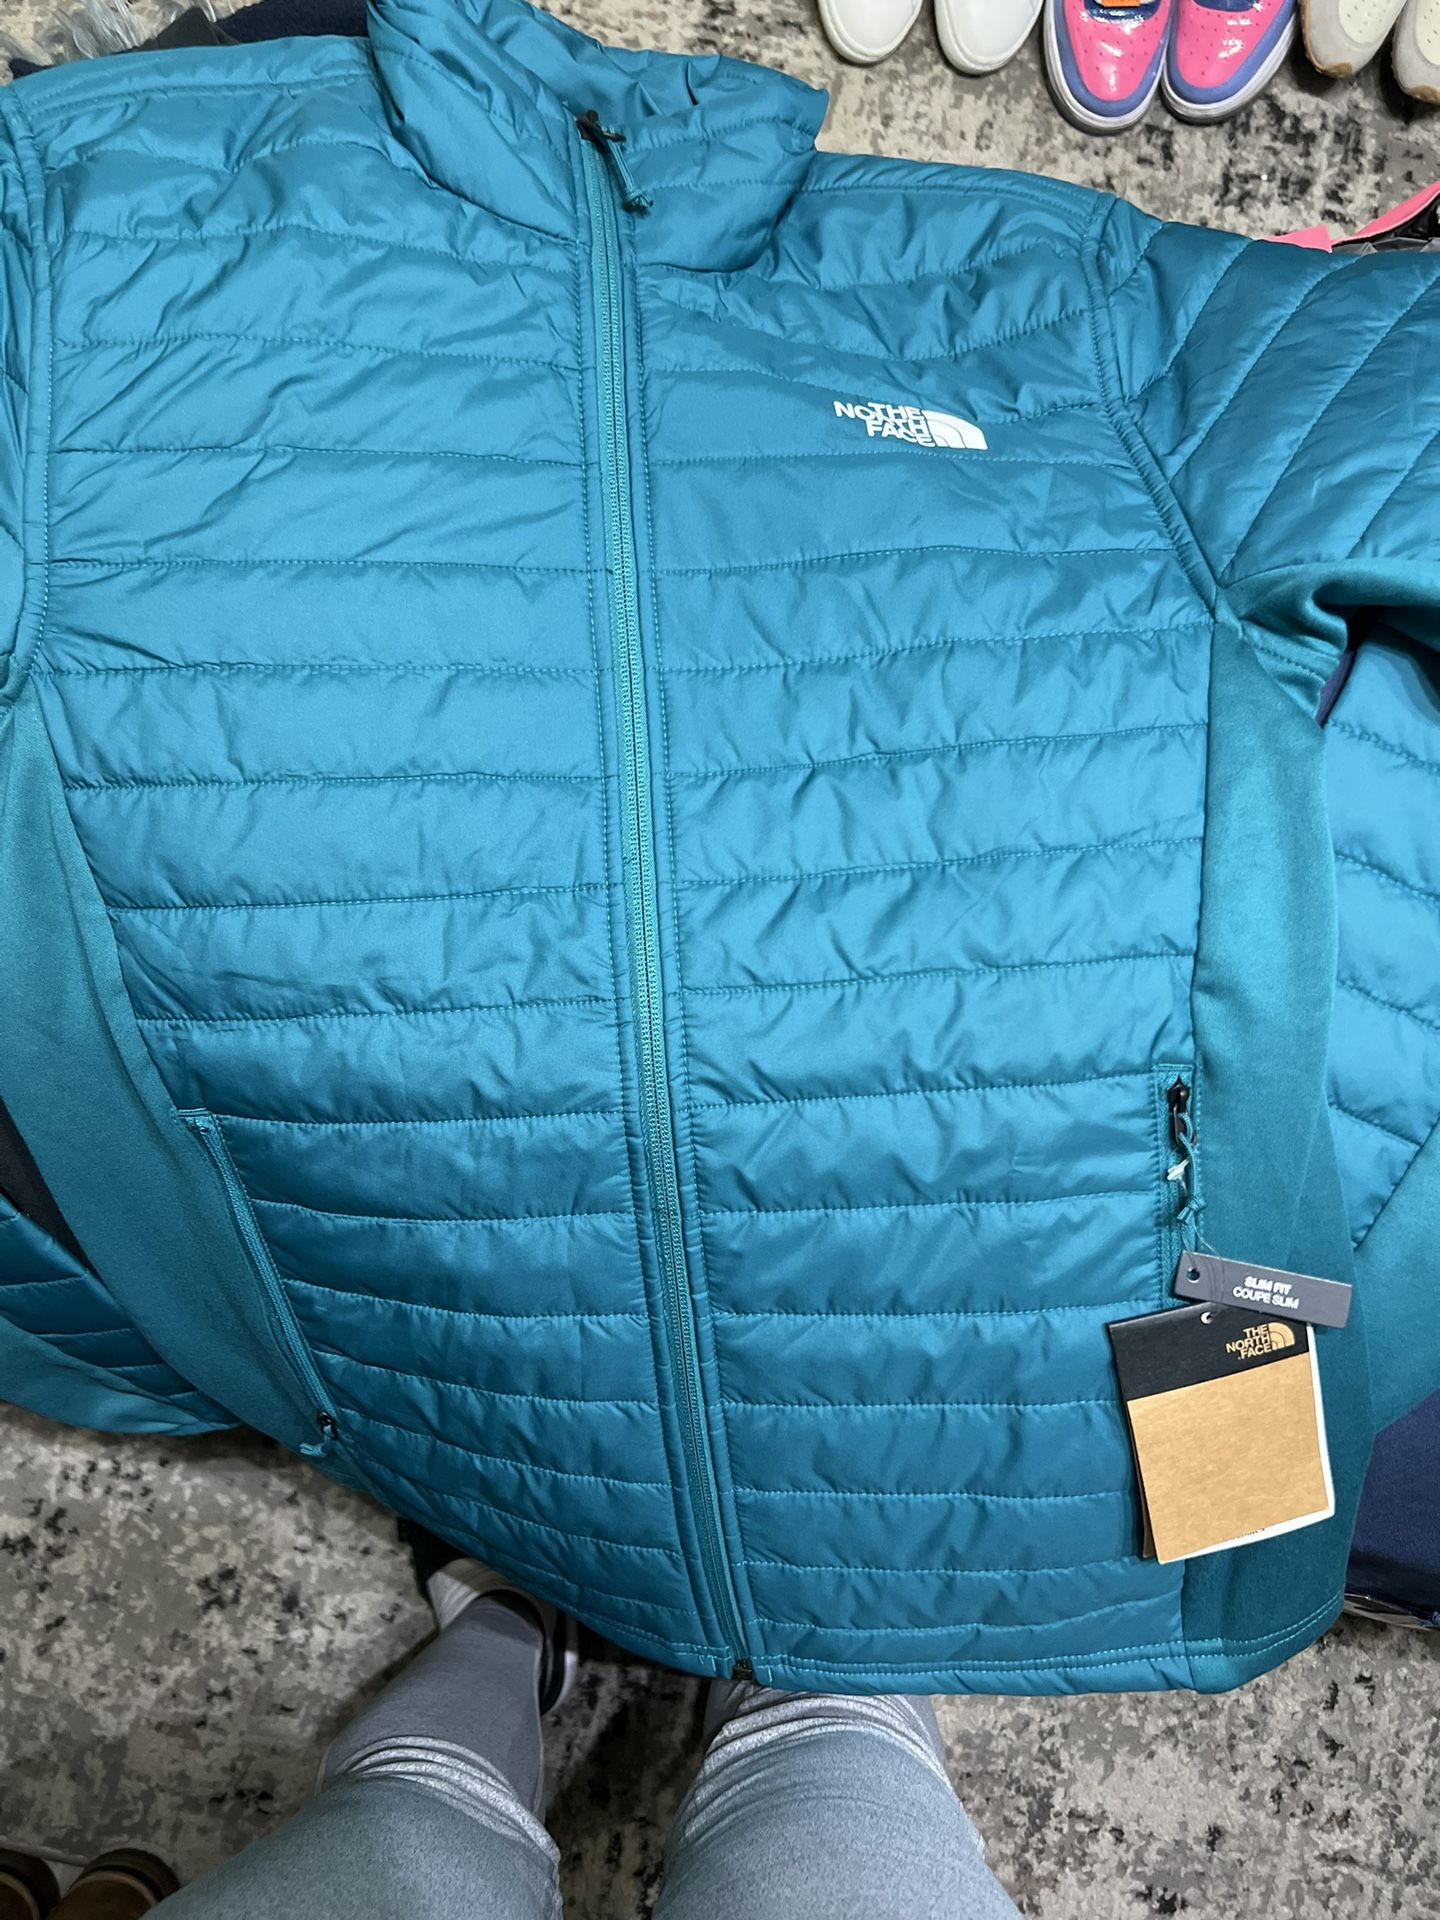 Brand New The North Face Jacket 